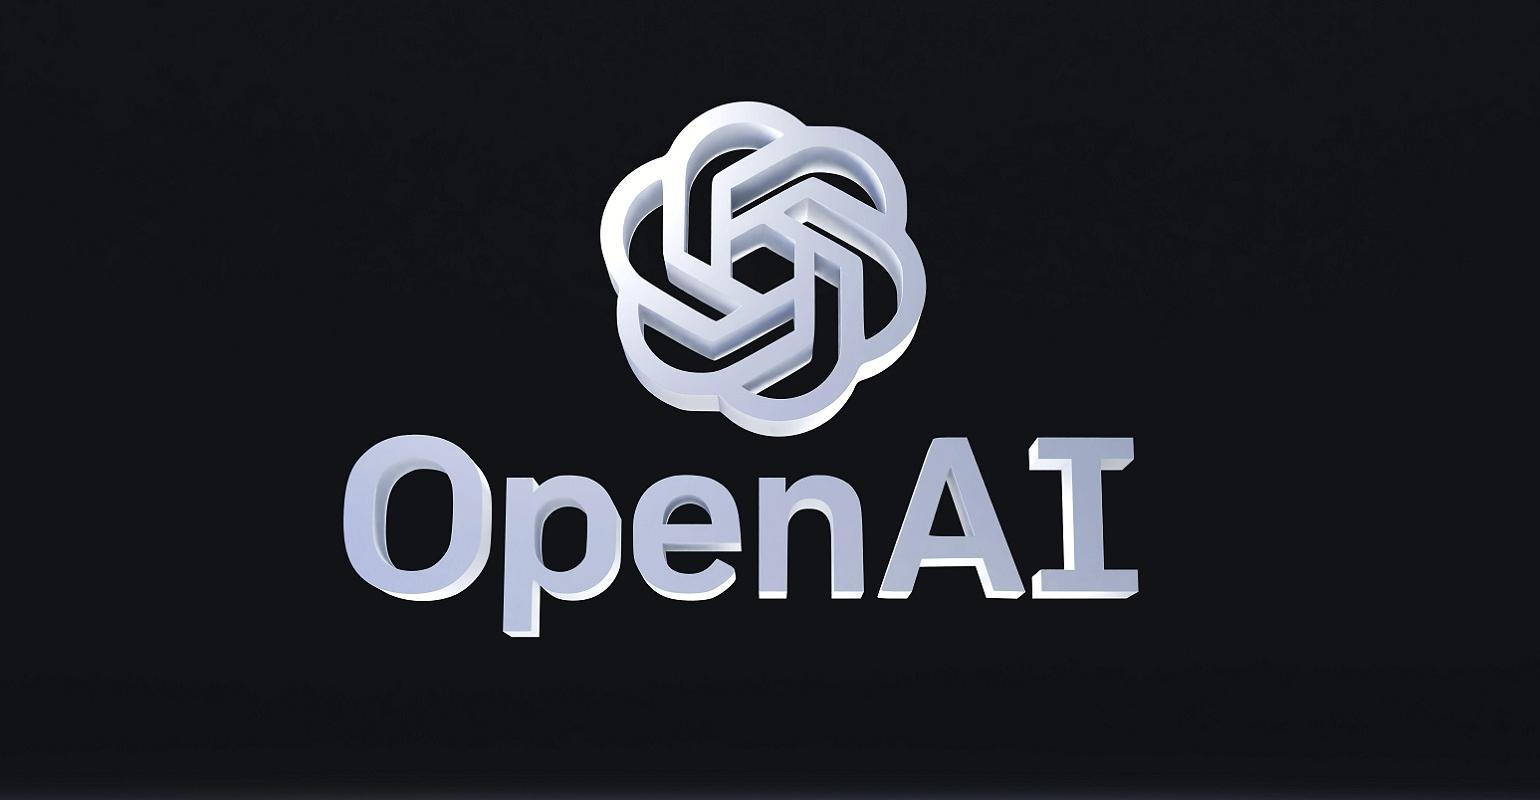 OpenAI on track to generate more than $1 bln revenue over 12